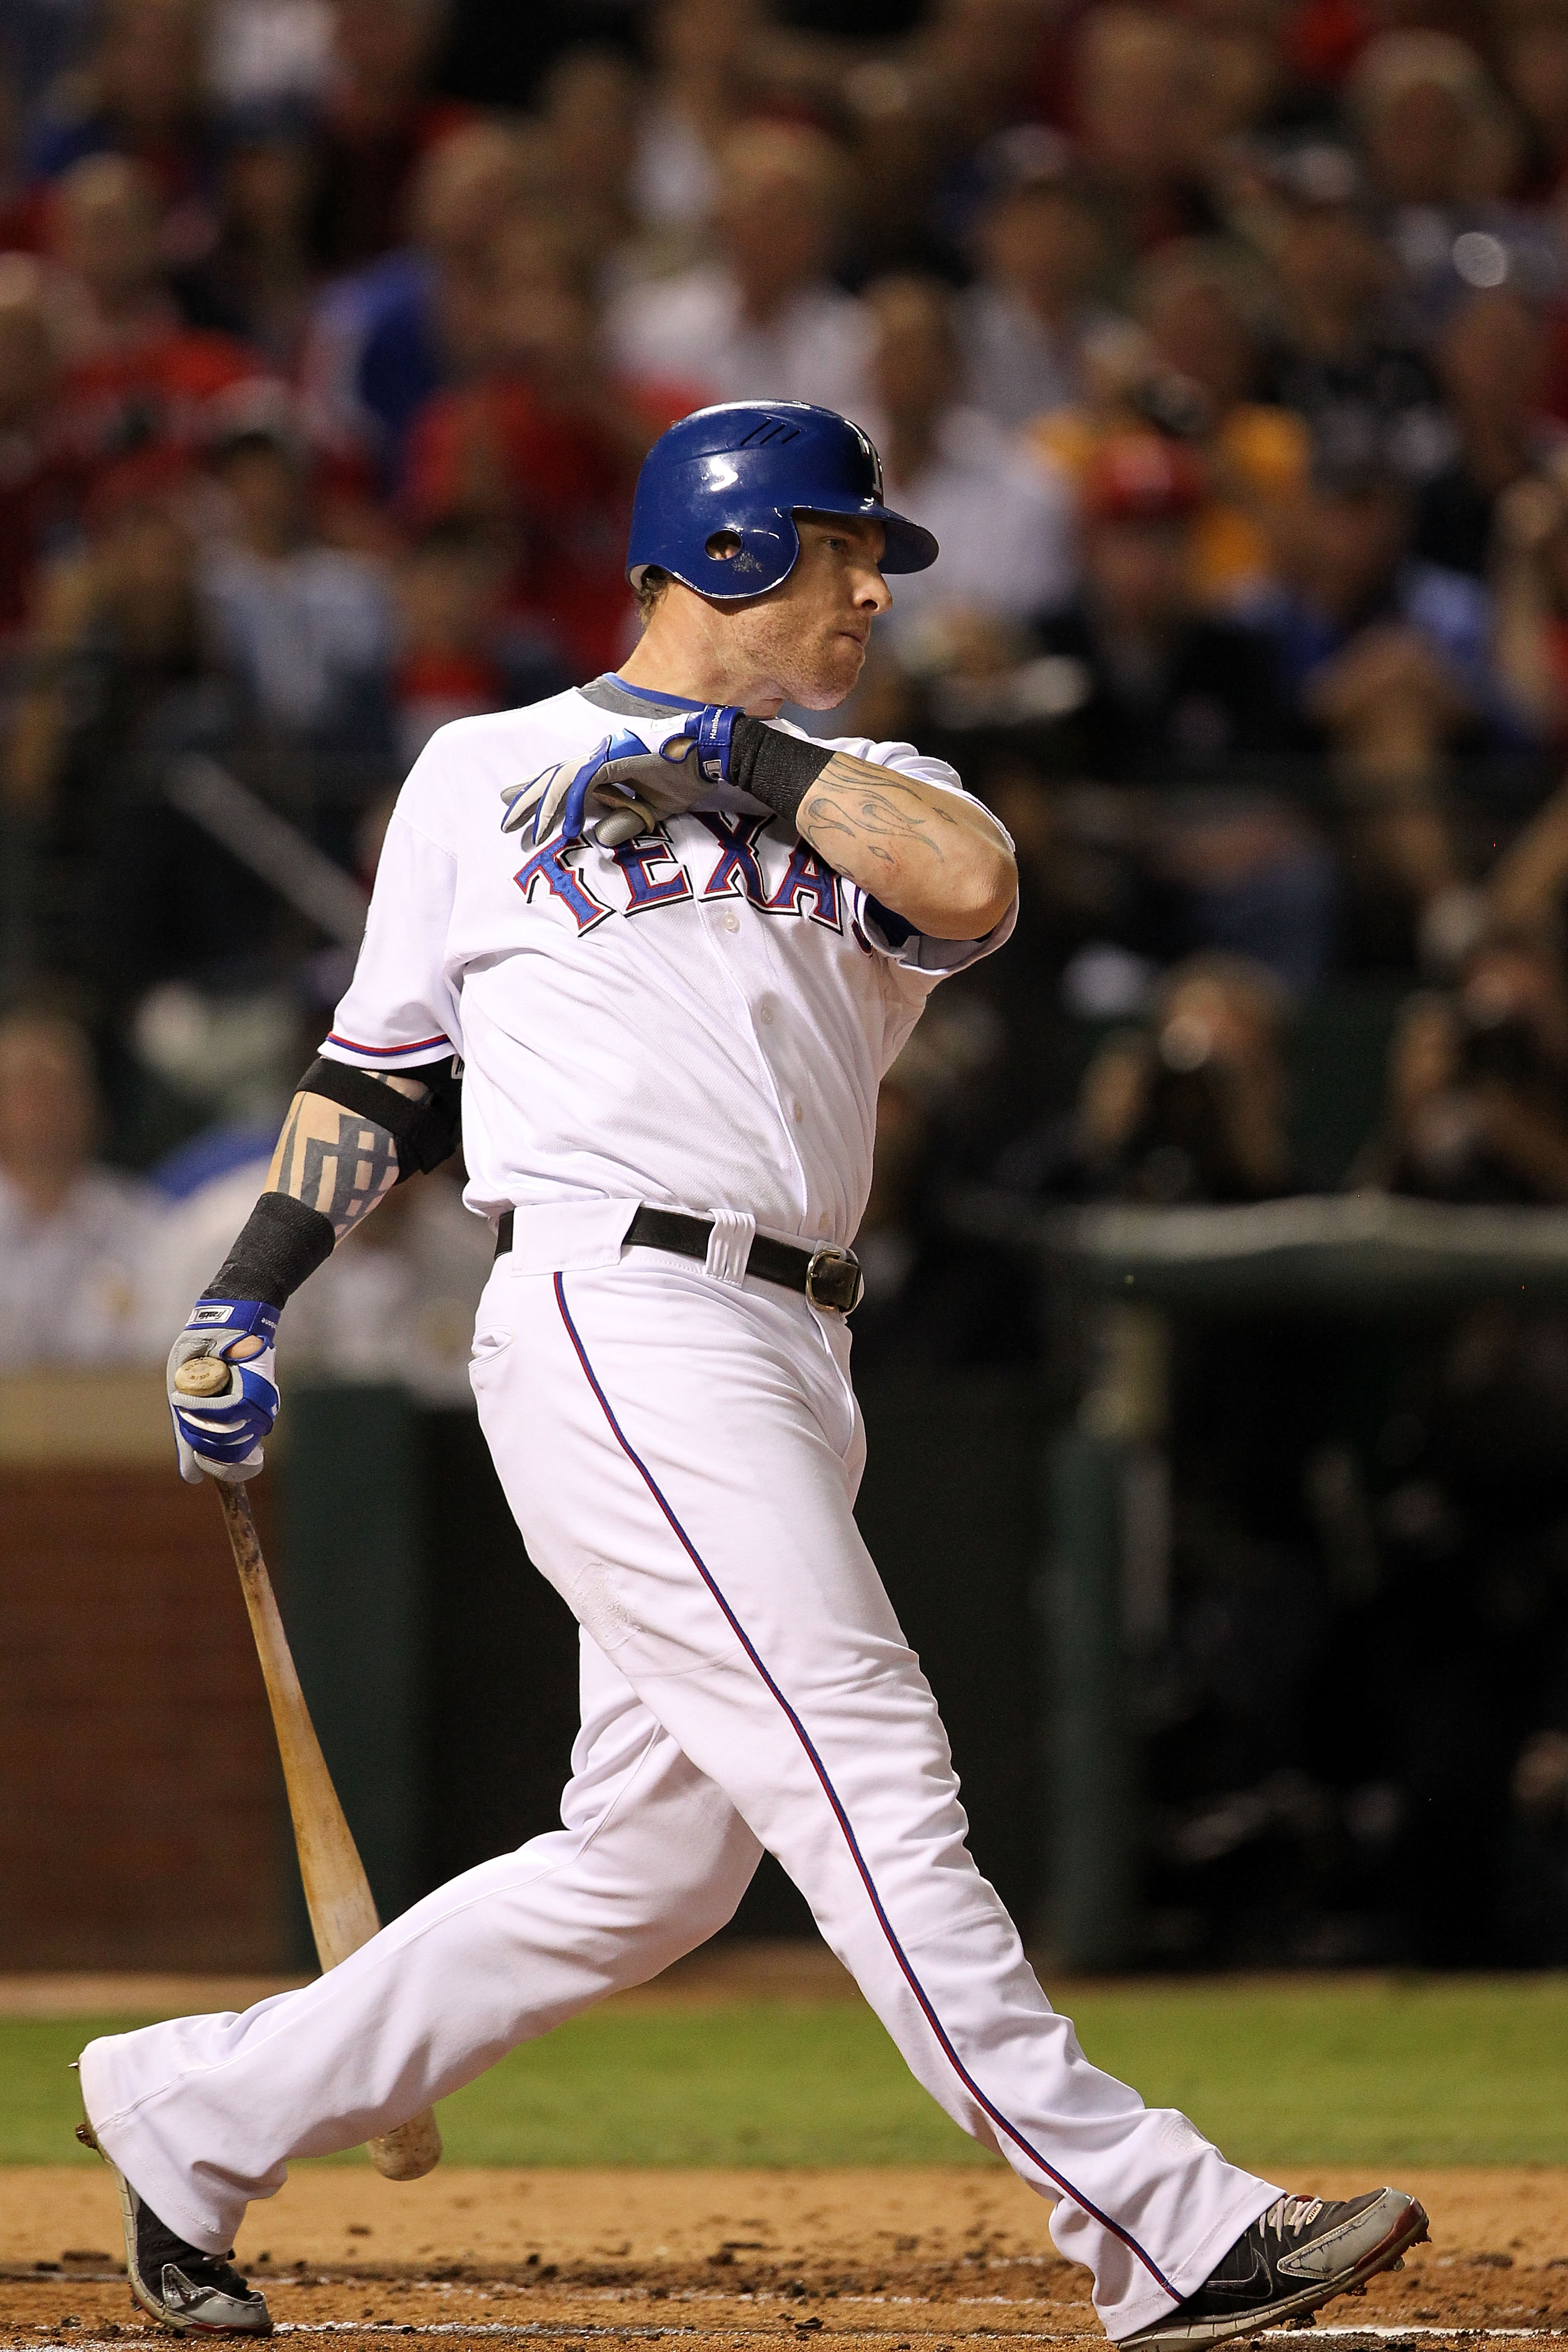 ARLINGTON, TX - NOVEMBER 01:  Josh Hamilton #32 of the Texas Rangers bats against the San Francisco Giants in Game Five of the 2010 MLB World Series at Rangers Ballpark in Arlington on November 1, 2010 in Arlington, Texas. The Giants won 3-1. (Photo by Ro